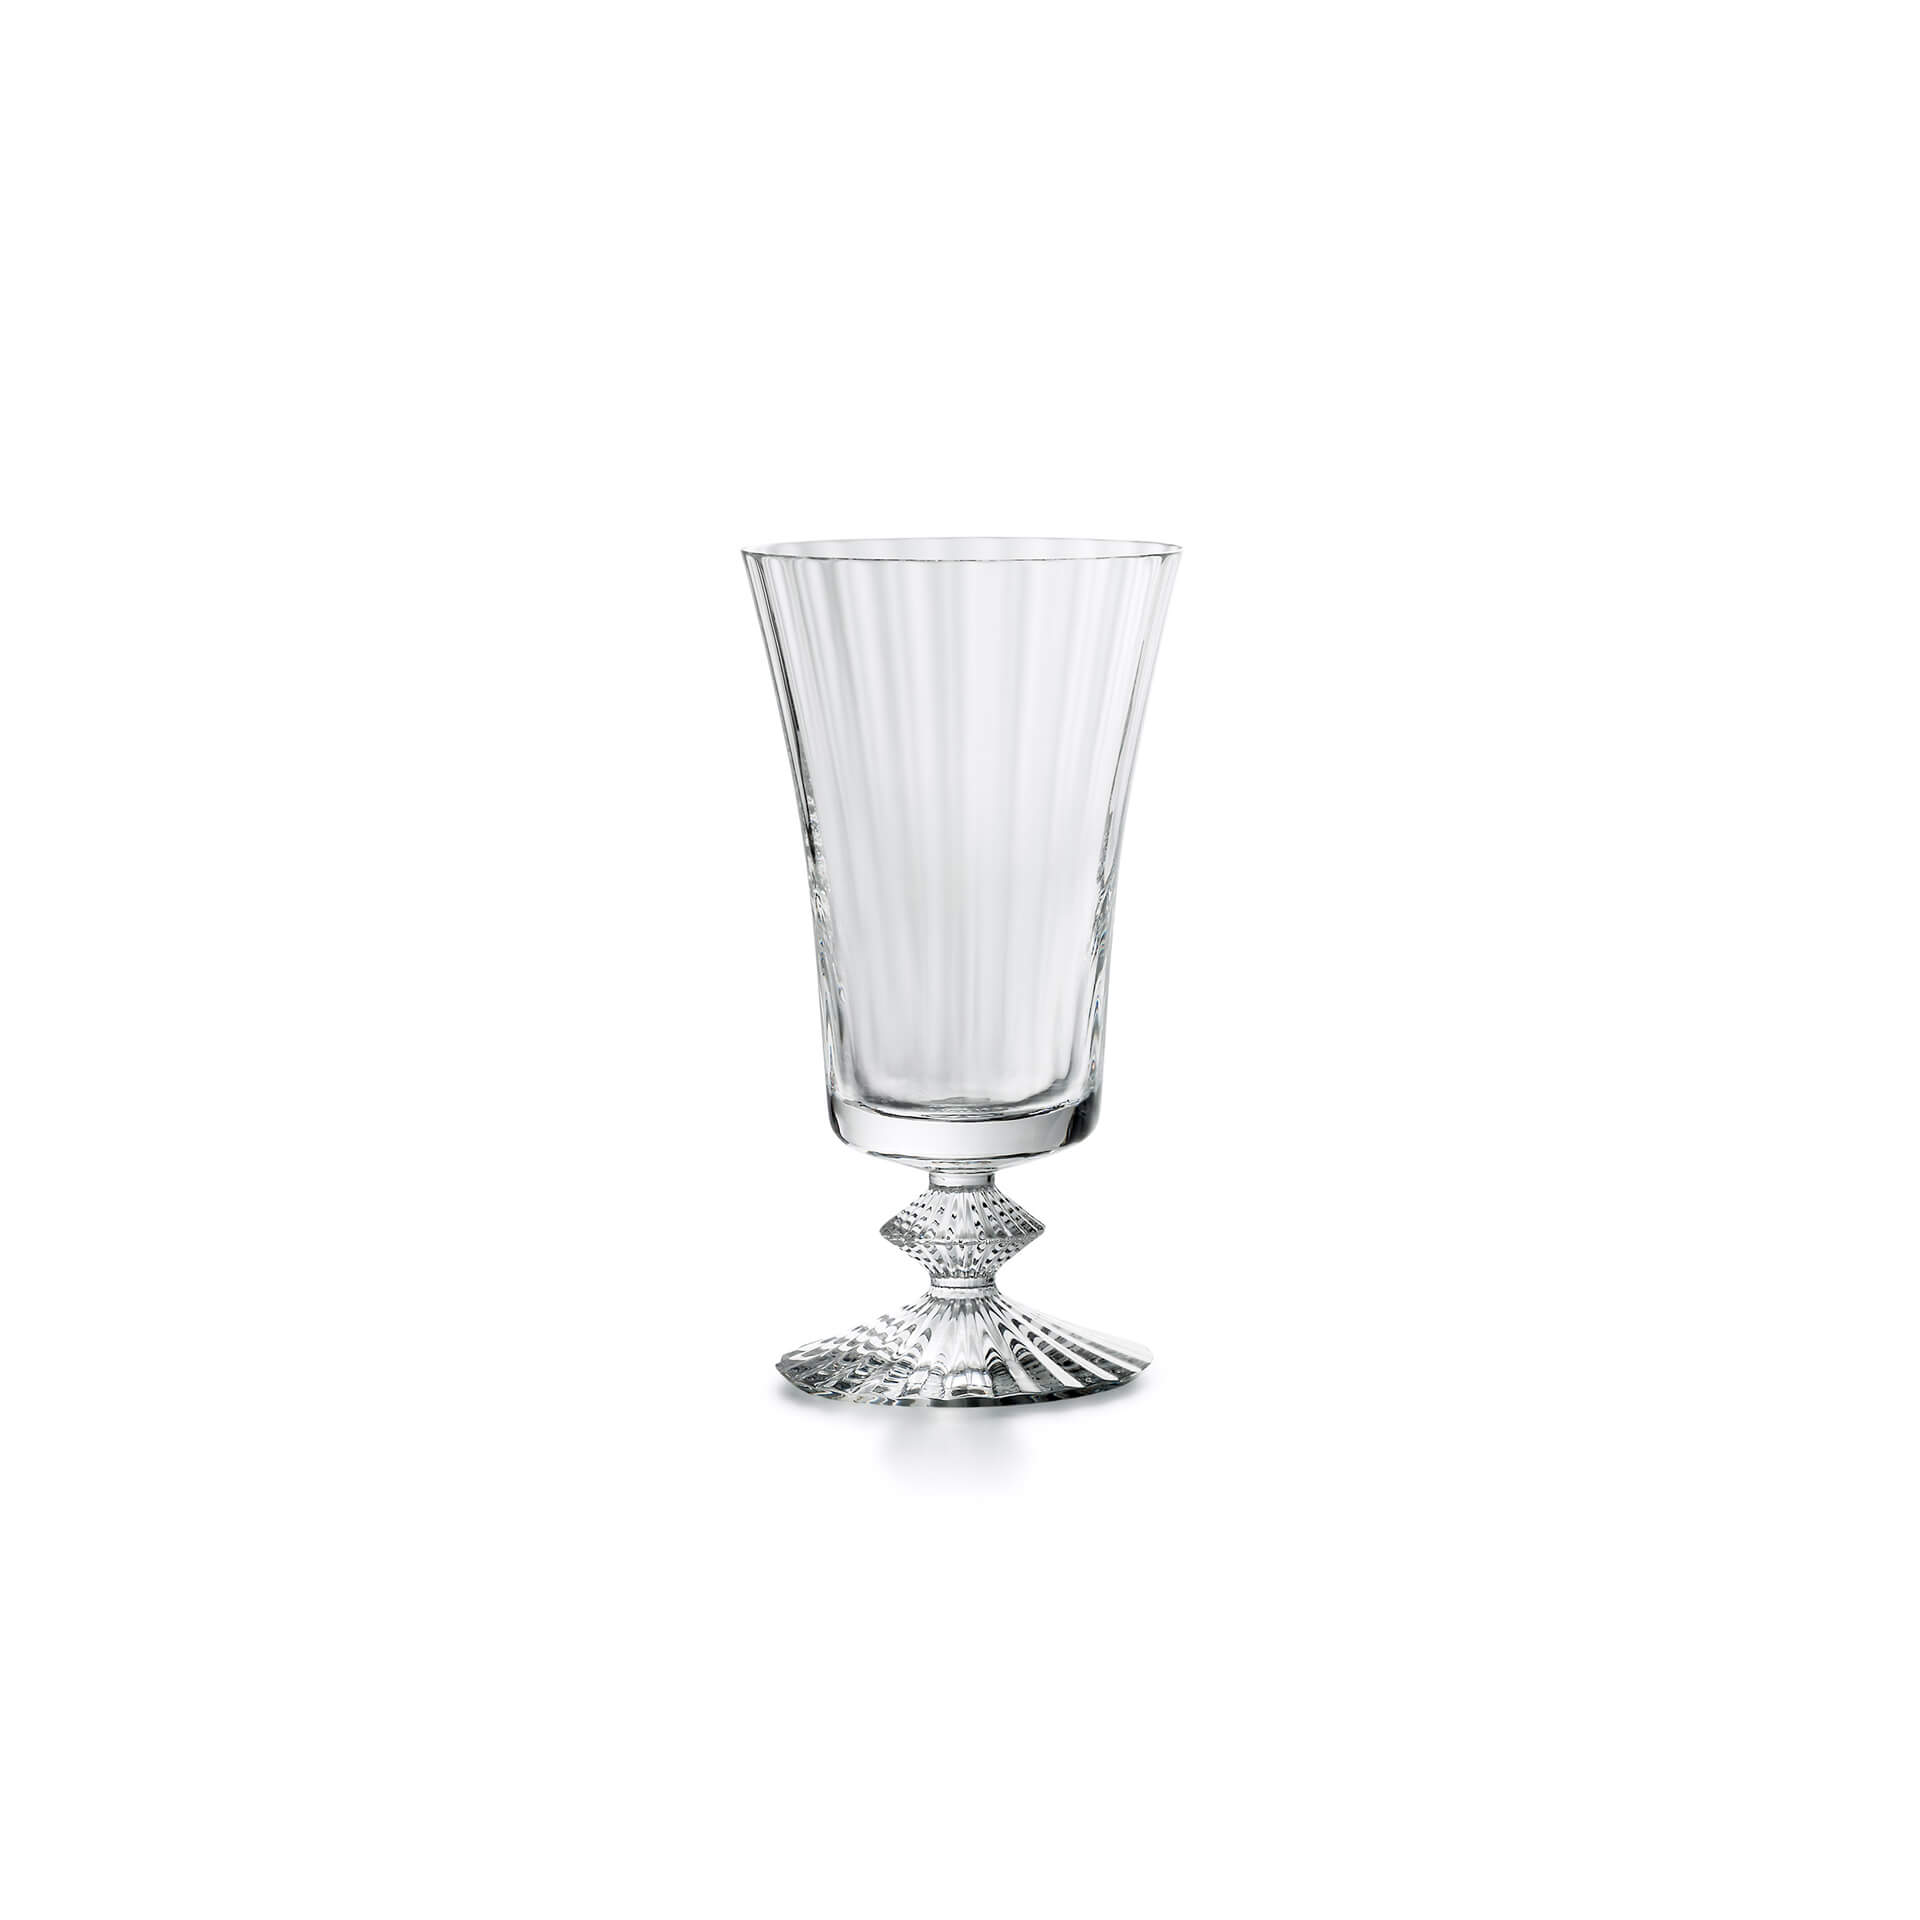 Mille Nuits Glass 2 Baccarat